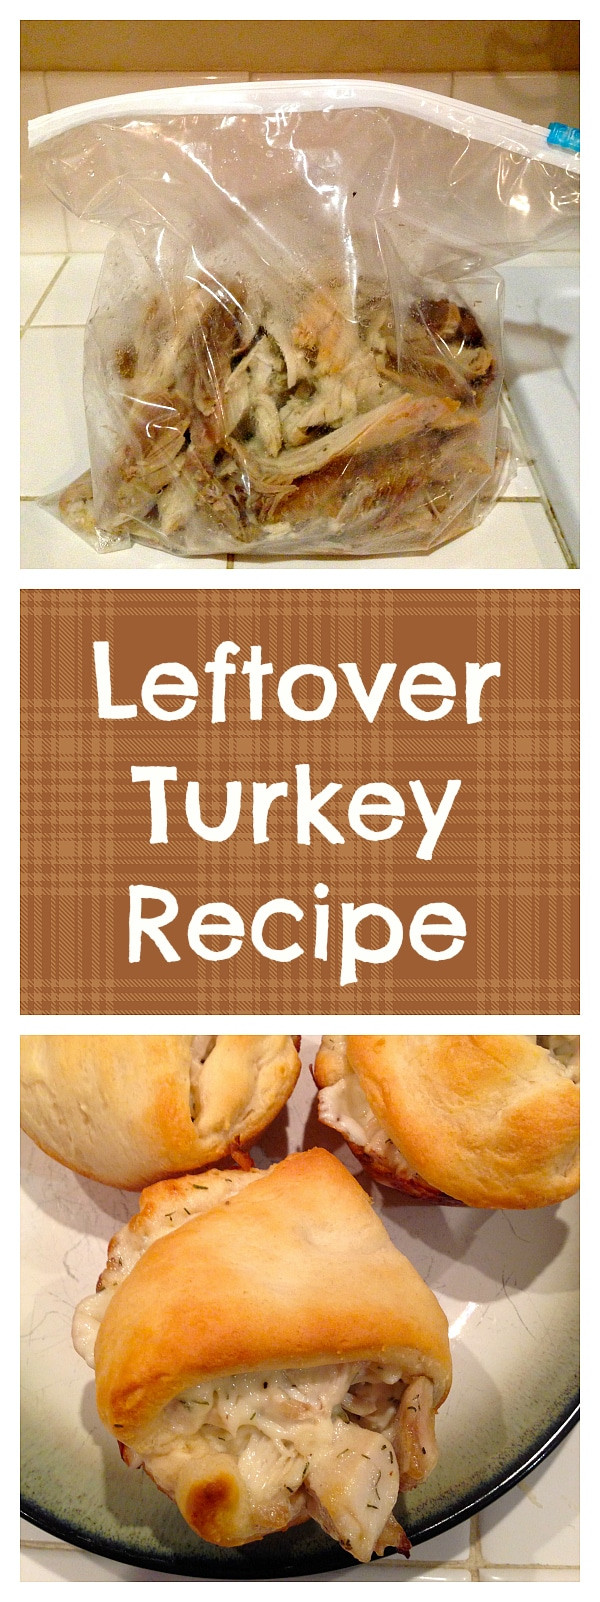 Left Over Thanksgiving Turkey Recipes
 Best Leftover Turkey Recipe · The Typical Mom